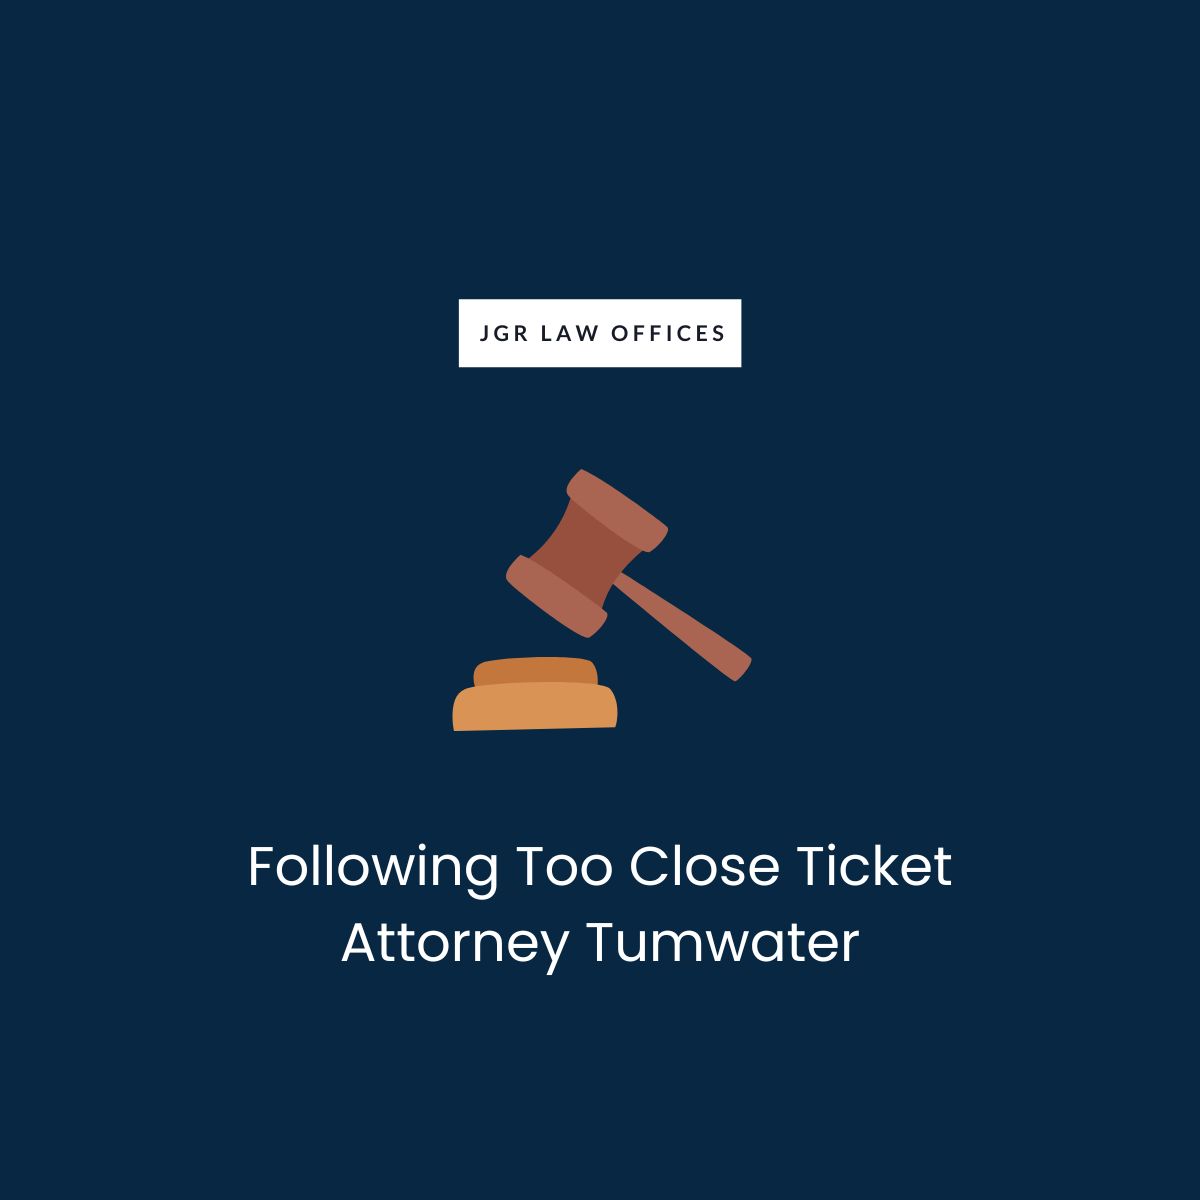 Following Too Close Ticket Attorney Tumwater